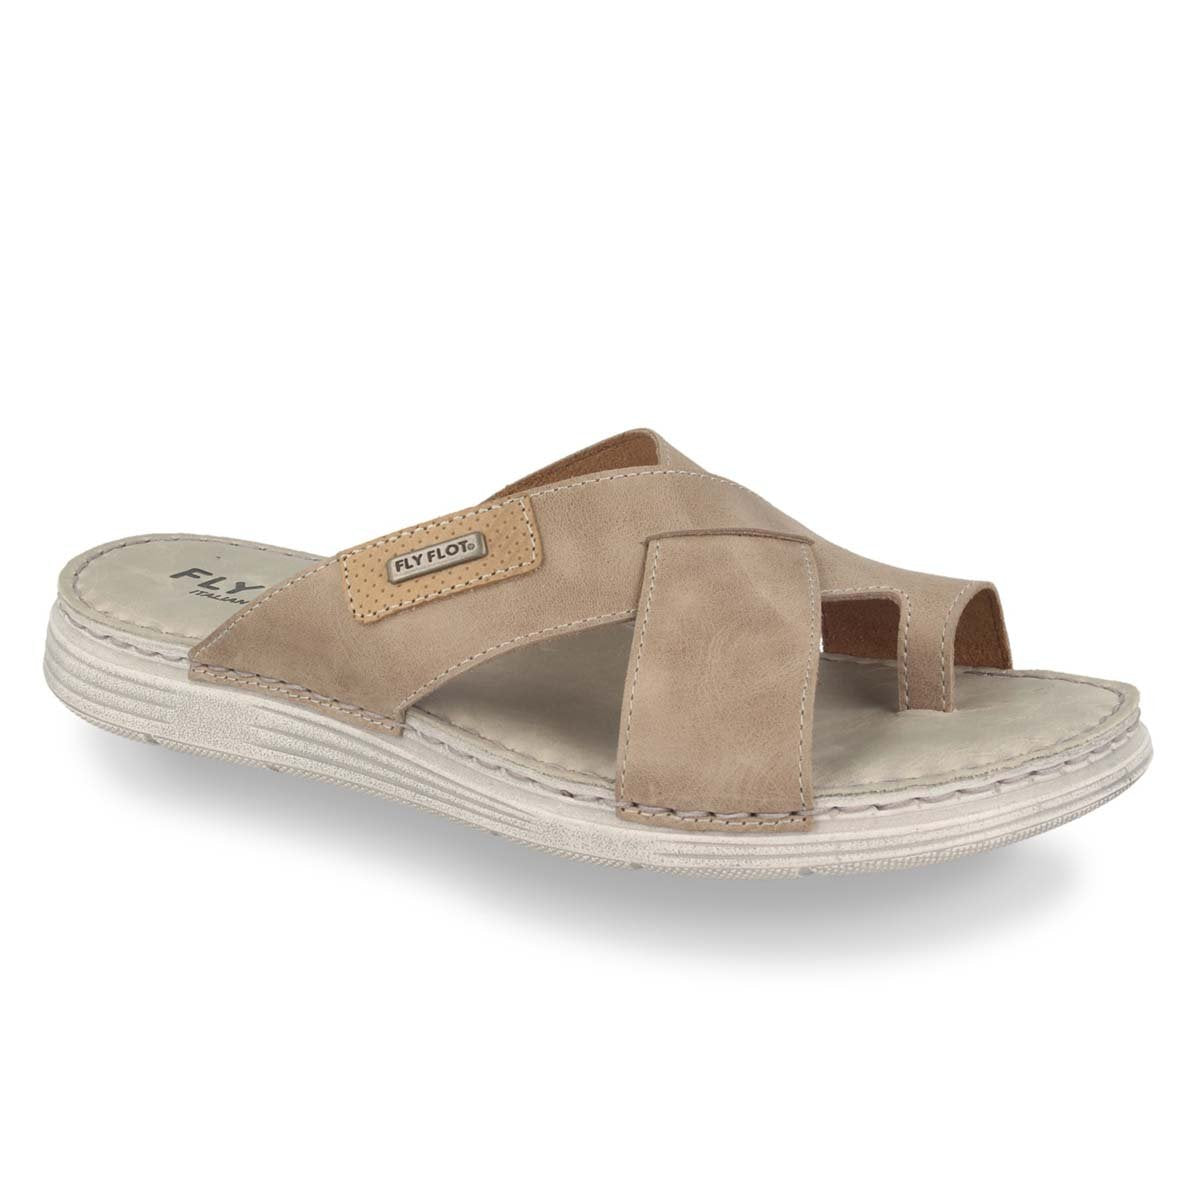 Photo of the Leather Man Slipper Taupe (68126gg)